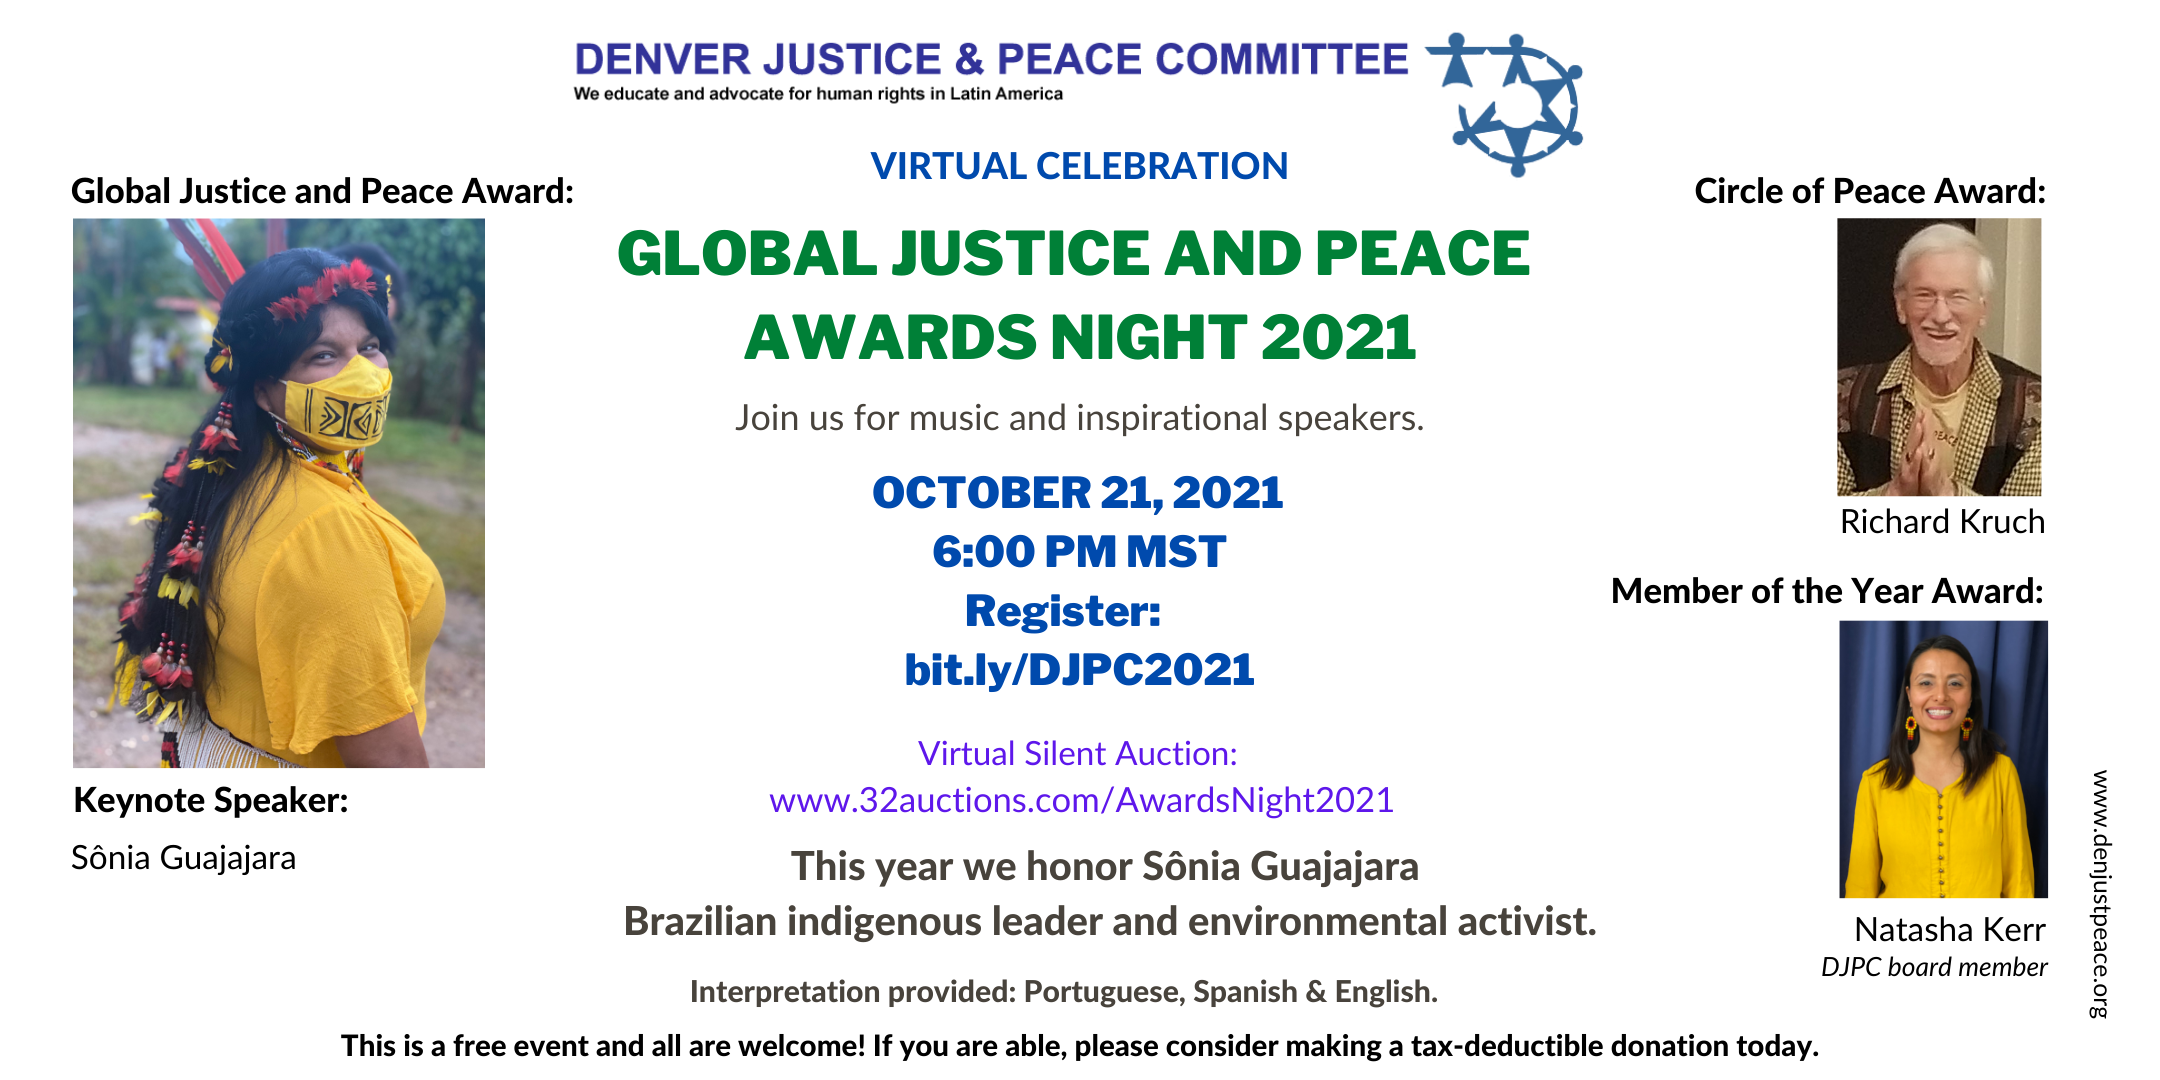 You are invited to our 2021 Virtual Annual Global Justice and Peace Awards Night.